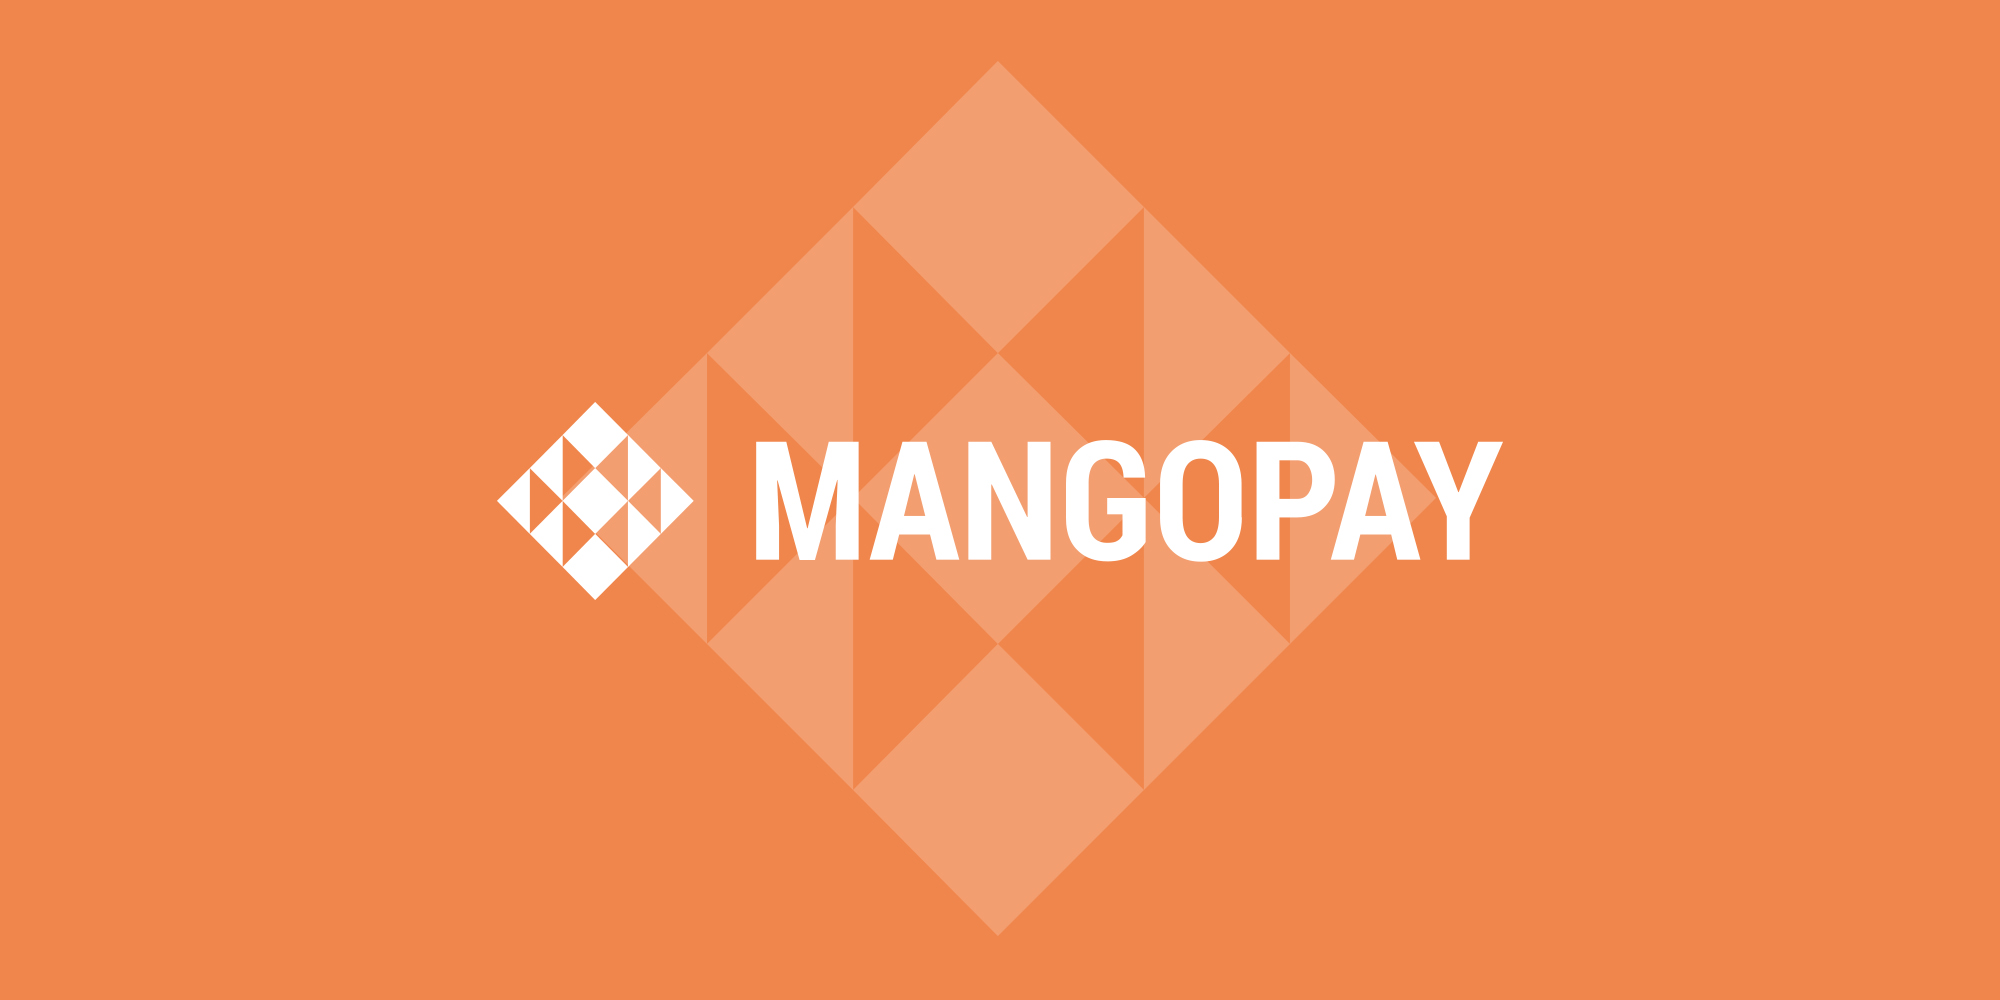 Mangopay partners with Storfund to offer marketplaces embedded cash flow solution for sellers